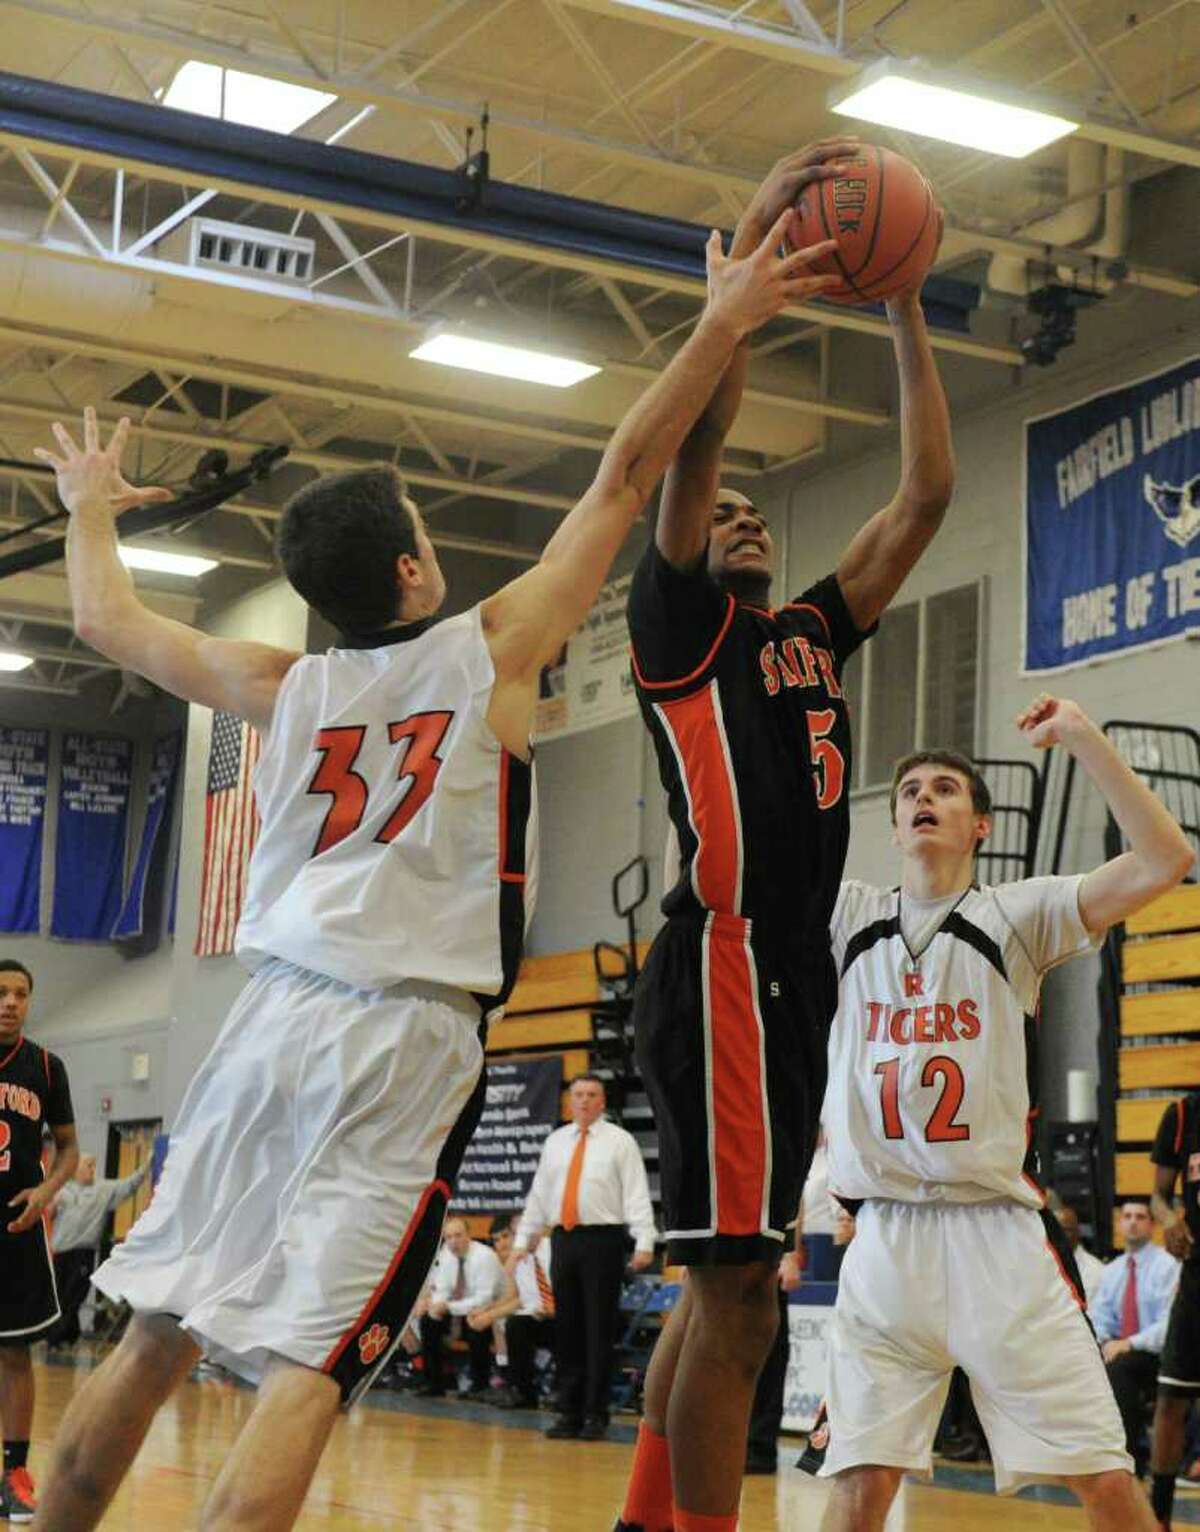 Stamford's Shawn Padilla goes up for a shot as Ridgefield's Jack Heller blocks him as Stamford High School and Ridgefield High face off in the FCIAC boys basketball semifinals at Ludlowe High School in Fairfield, Conn., February 25, 2012. Ridgefield won the game 50-46.